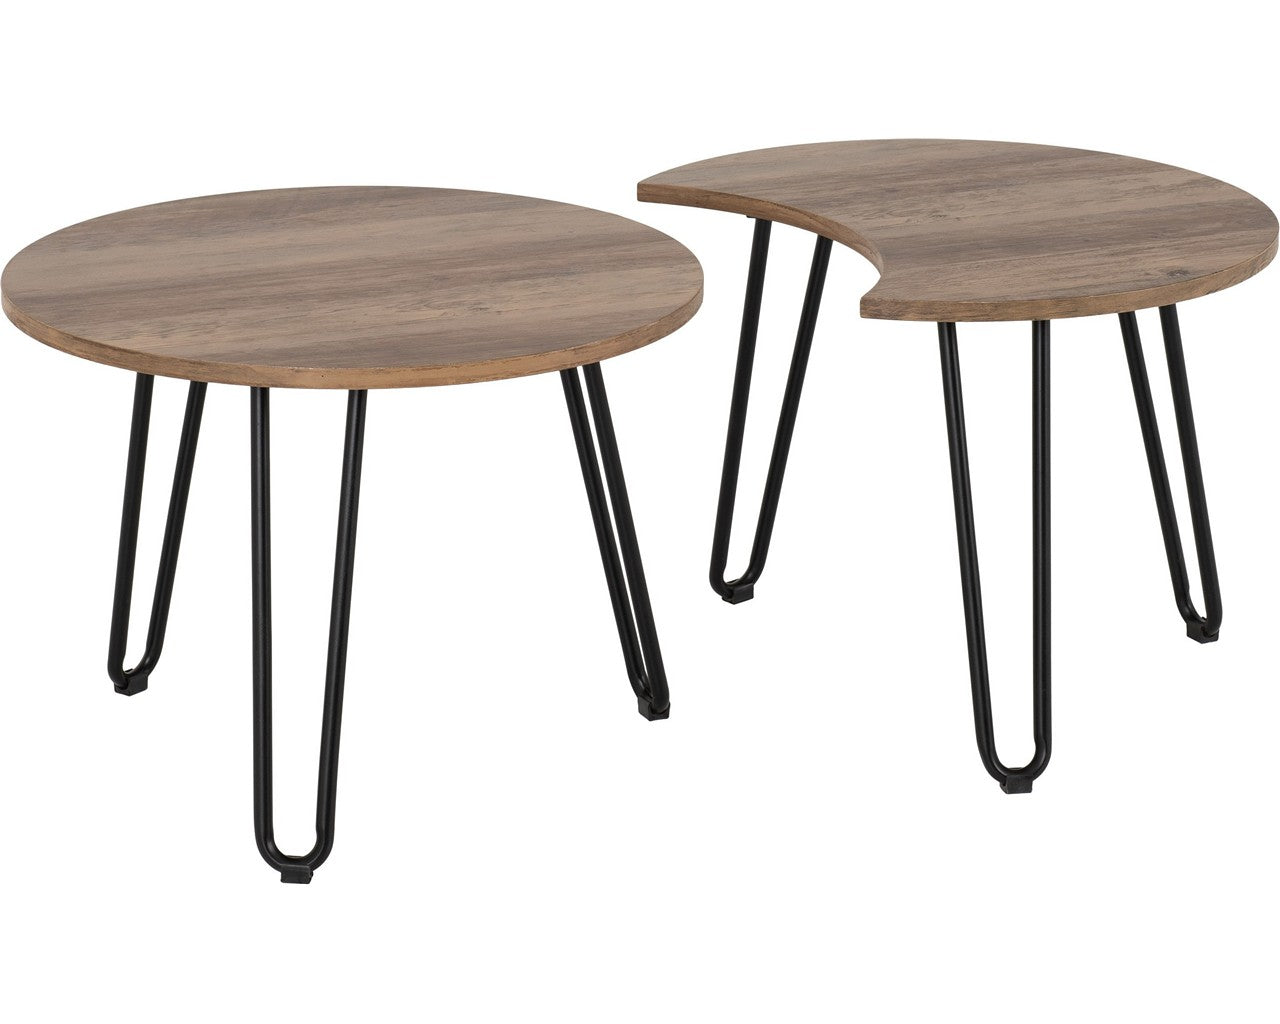 athens-duo-coffee-table - 3